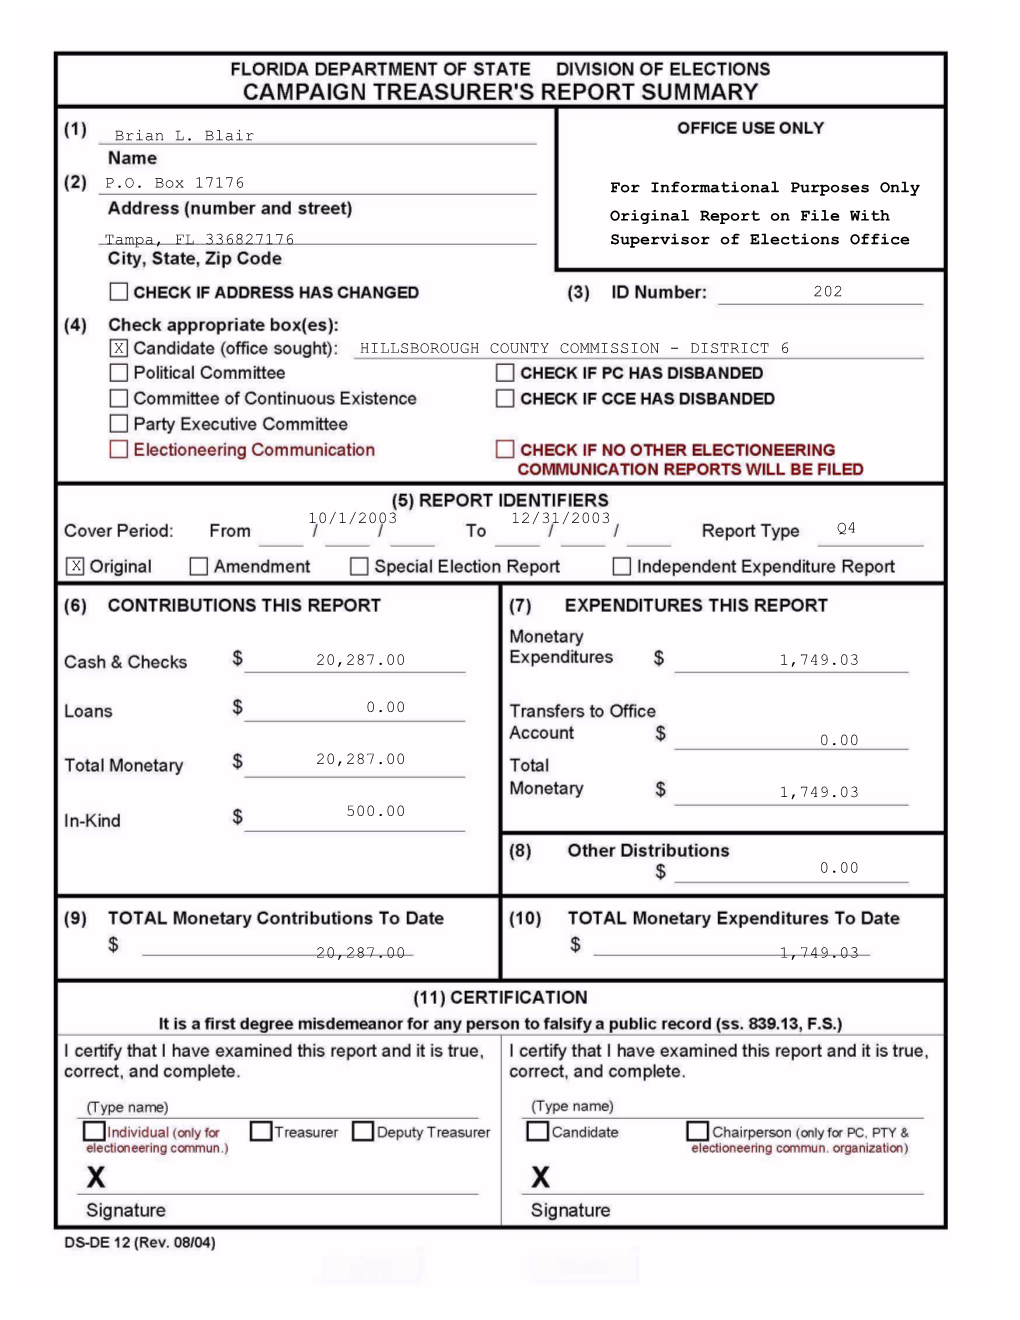 For Informational Purposes Only Original Report on File with Tampa, FL 336827176 Supervisor of Elections Office